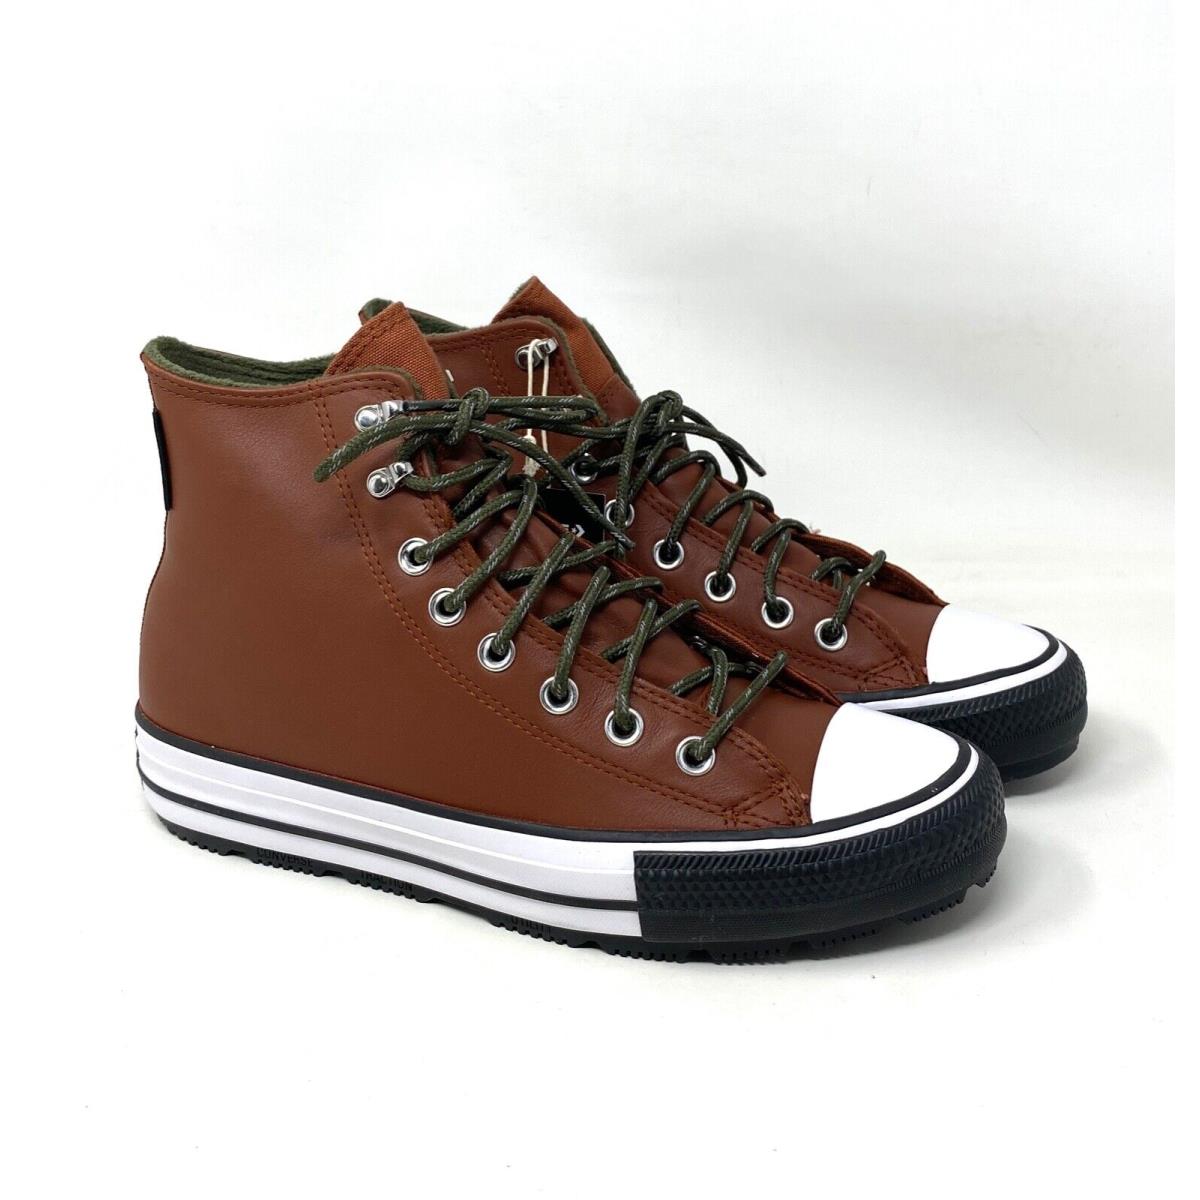 Converse Ctas Winter Shoes High Top Women`s Size Leather Brown Sneakers  171440C | 027010888220 - Converse shoes CTAS High - Brown | SporTipTop